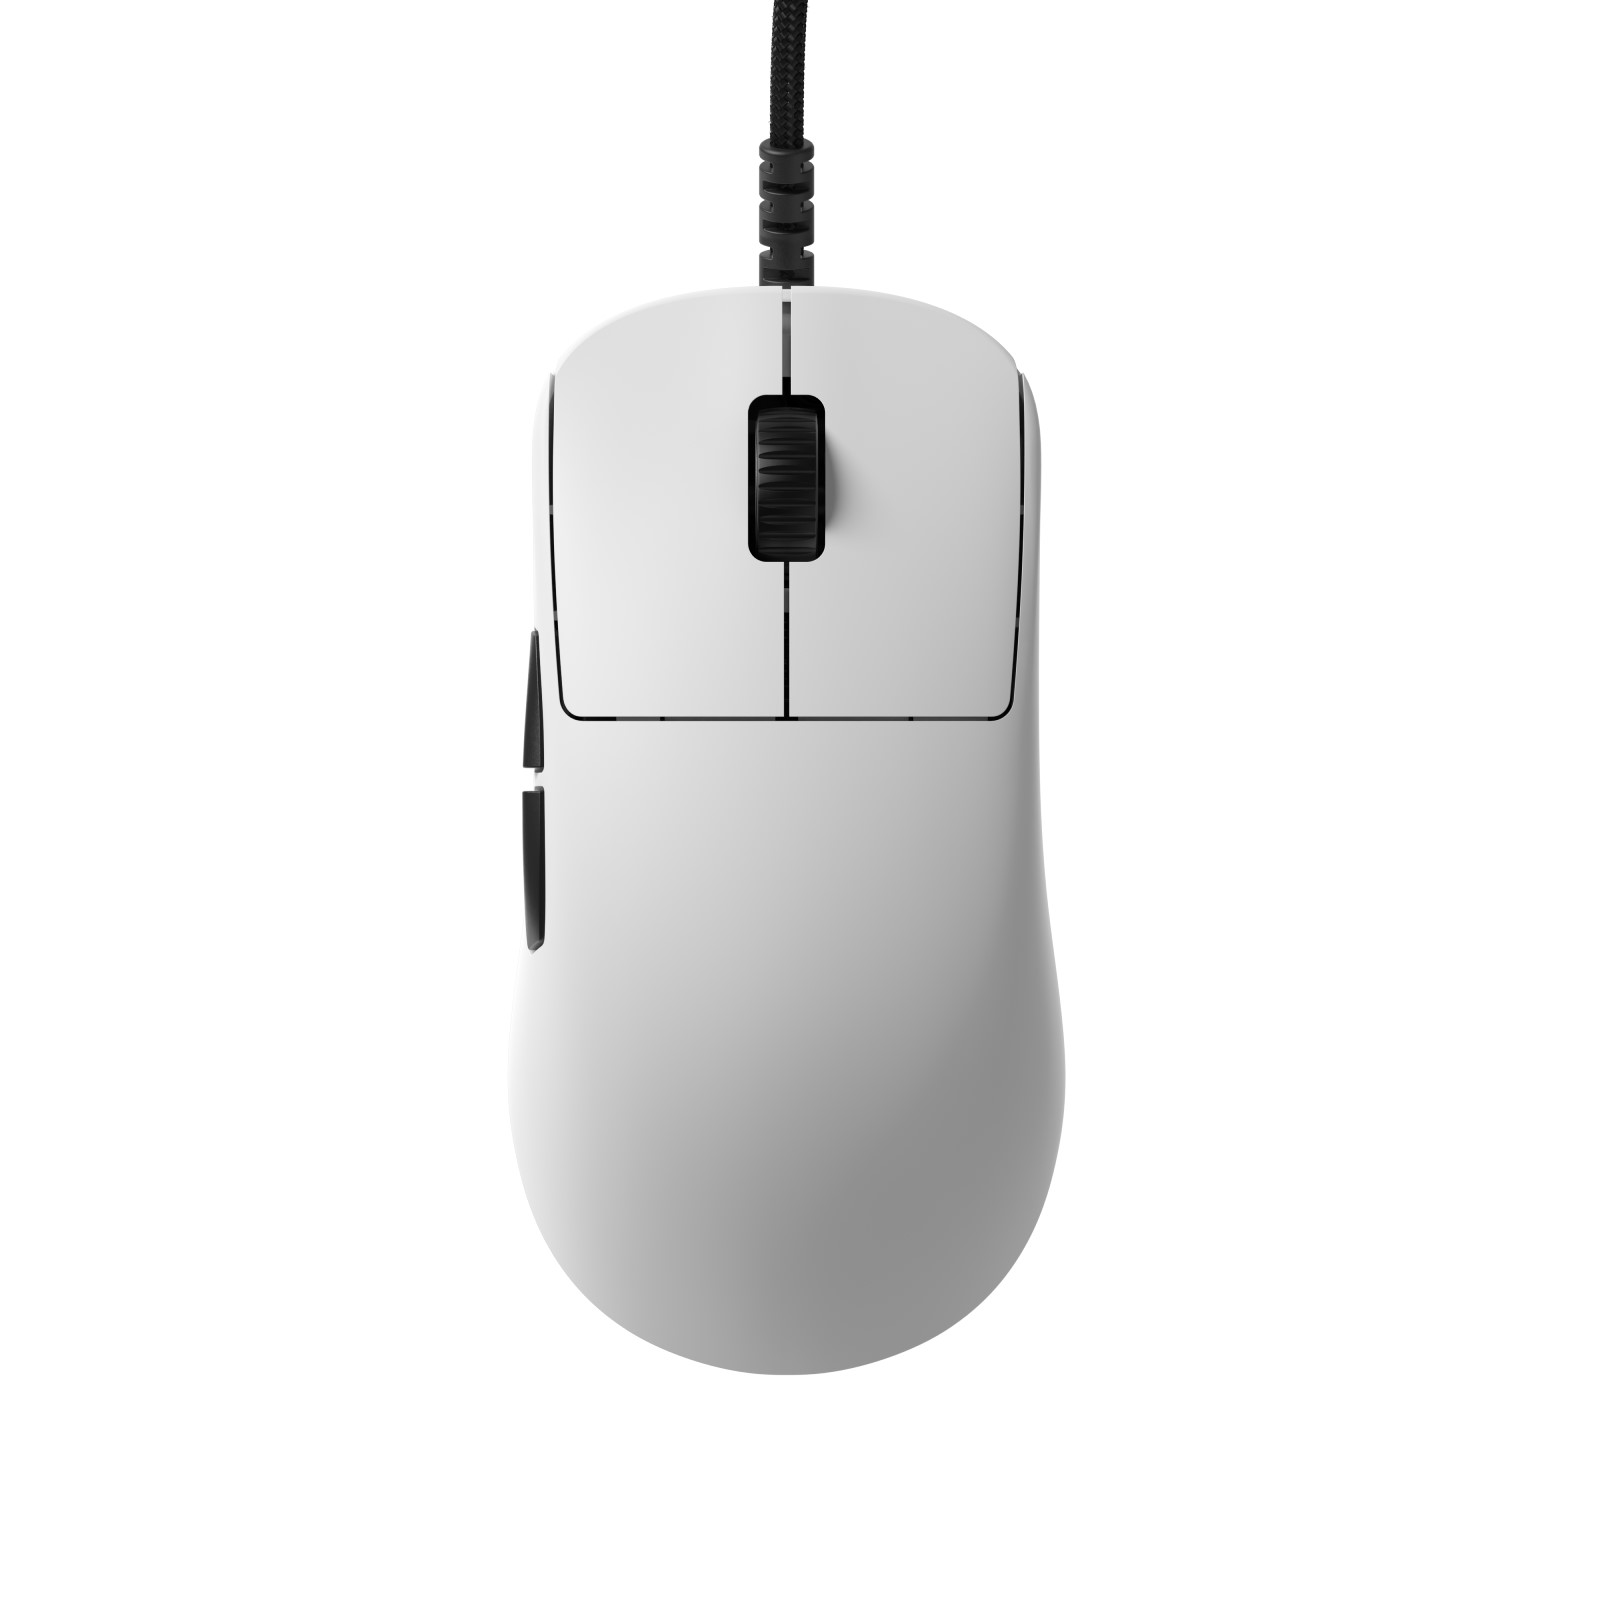 Endgame Gear OP1 Gaming Mouse White